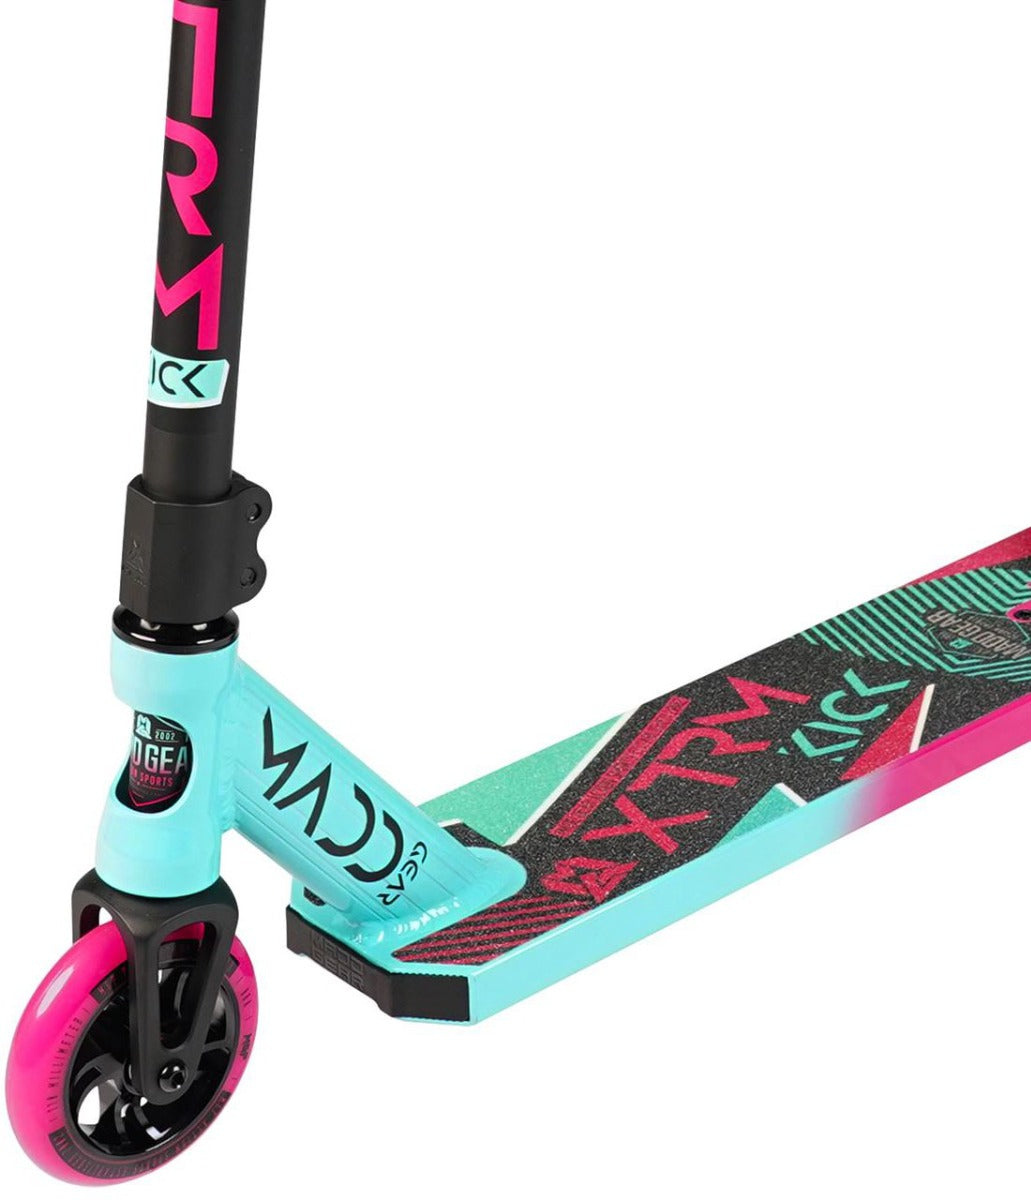 Madd Gear MGP Kick Extreme V5 Complete Stunt Scooter - Teal / Pink - Front Wheel